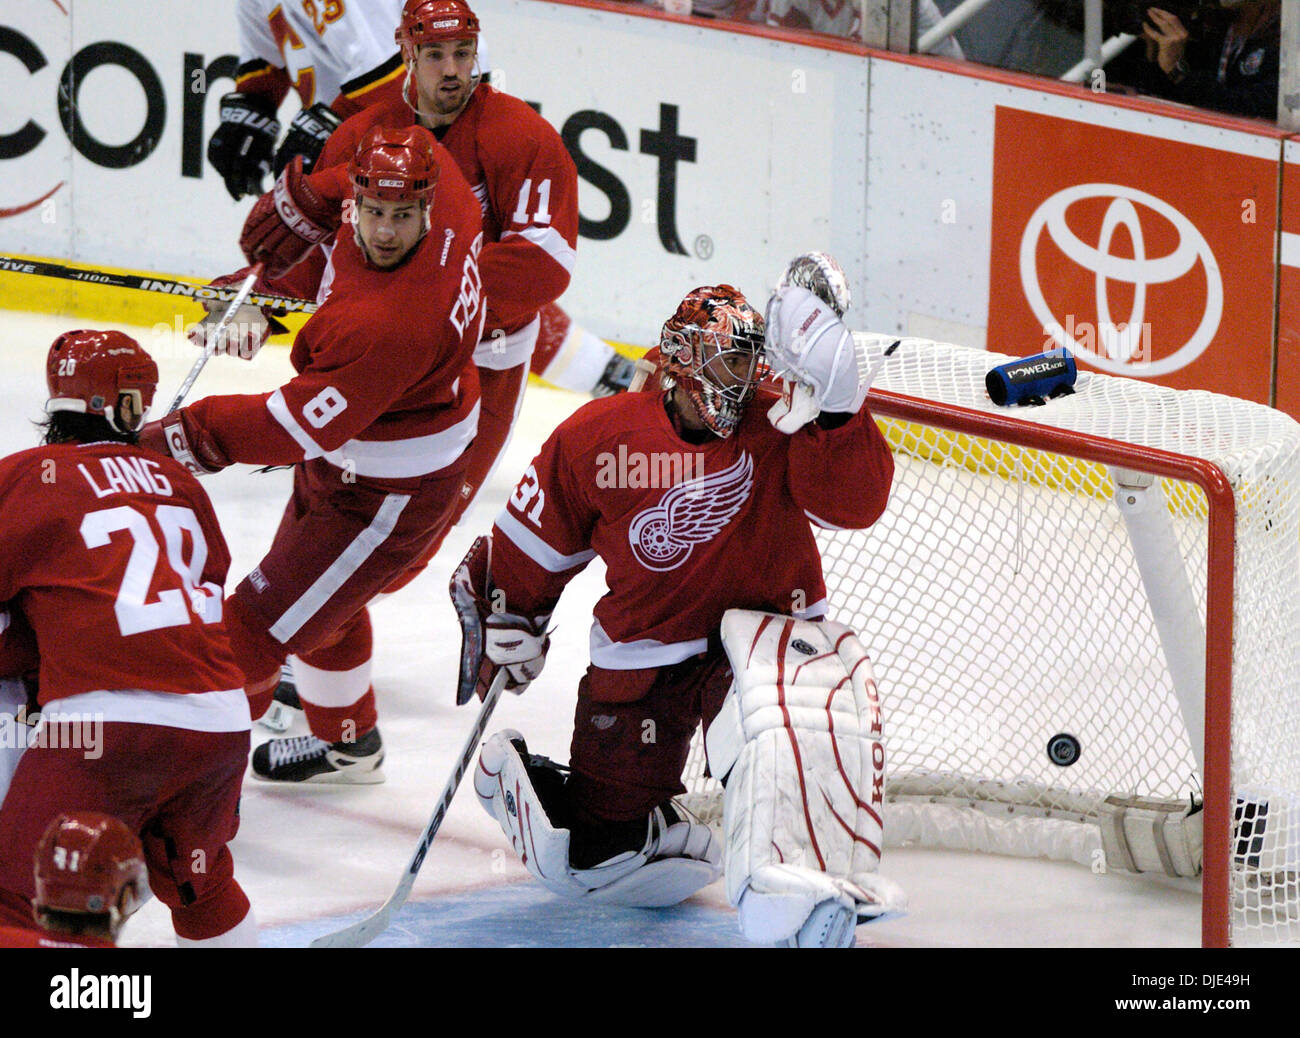 Apr 22, 2004; Detroit, MI, USA; CURTIS JOSEPH watches the overtime game-winning goal hit the back of the net, along with ROBERT LANG, JIRI FISCHER and MATHIEU DANDENAULT as the Wings drop game one 2-1 during the Western Conference semi-finals game between the Detroit Red Wings and Calgary Flames at Joe Louis Arena. Stock Photo